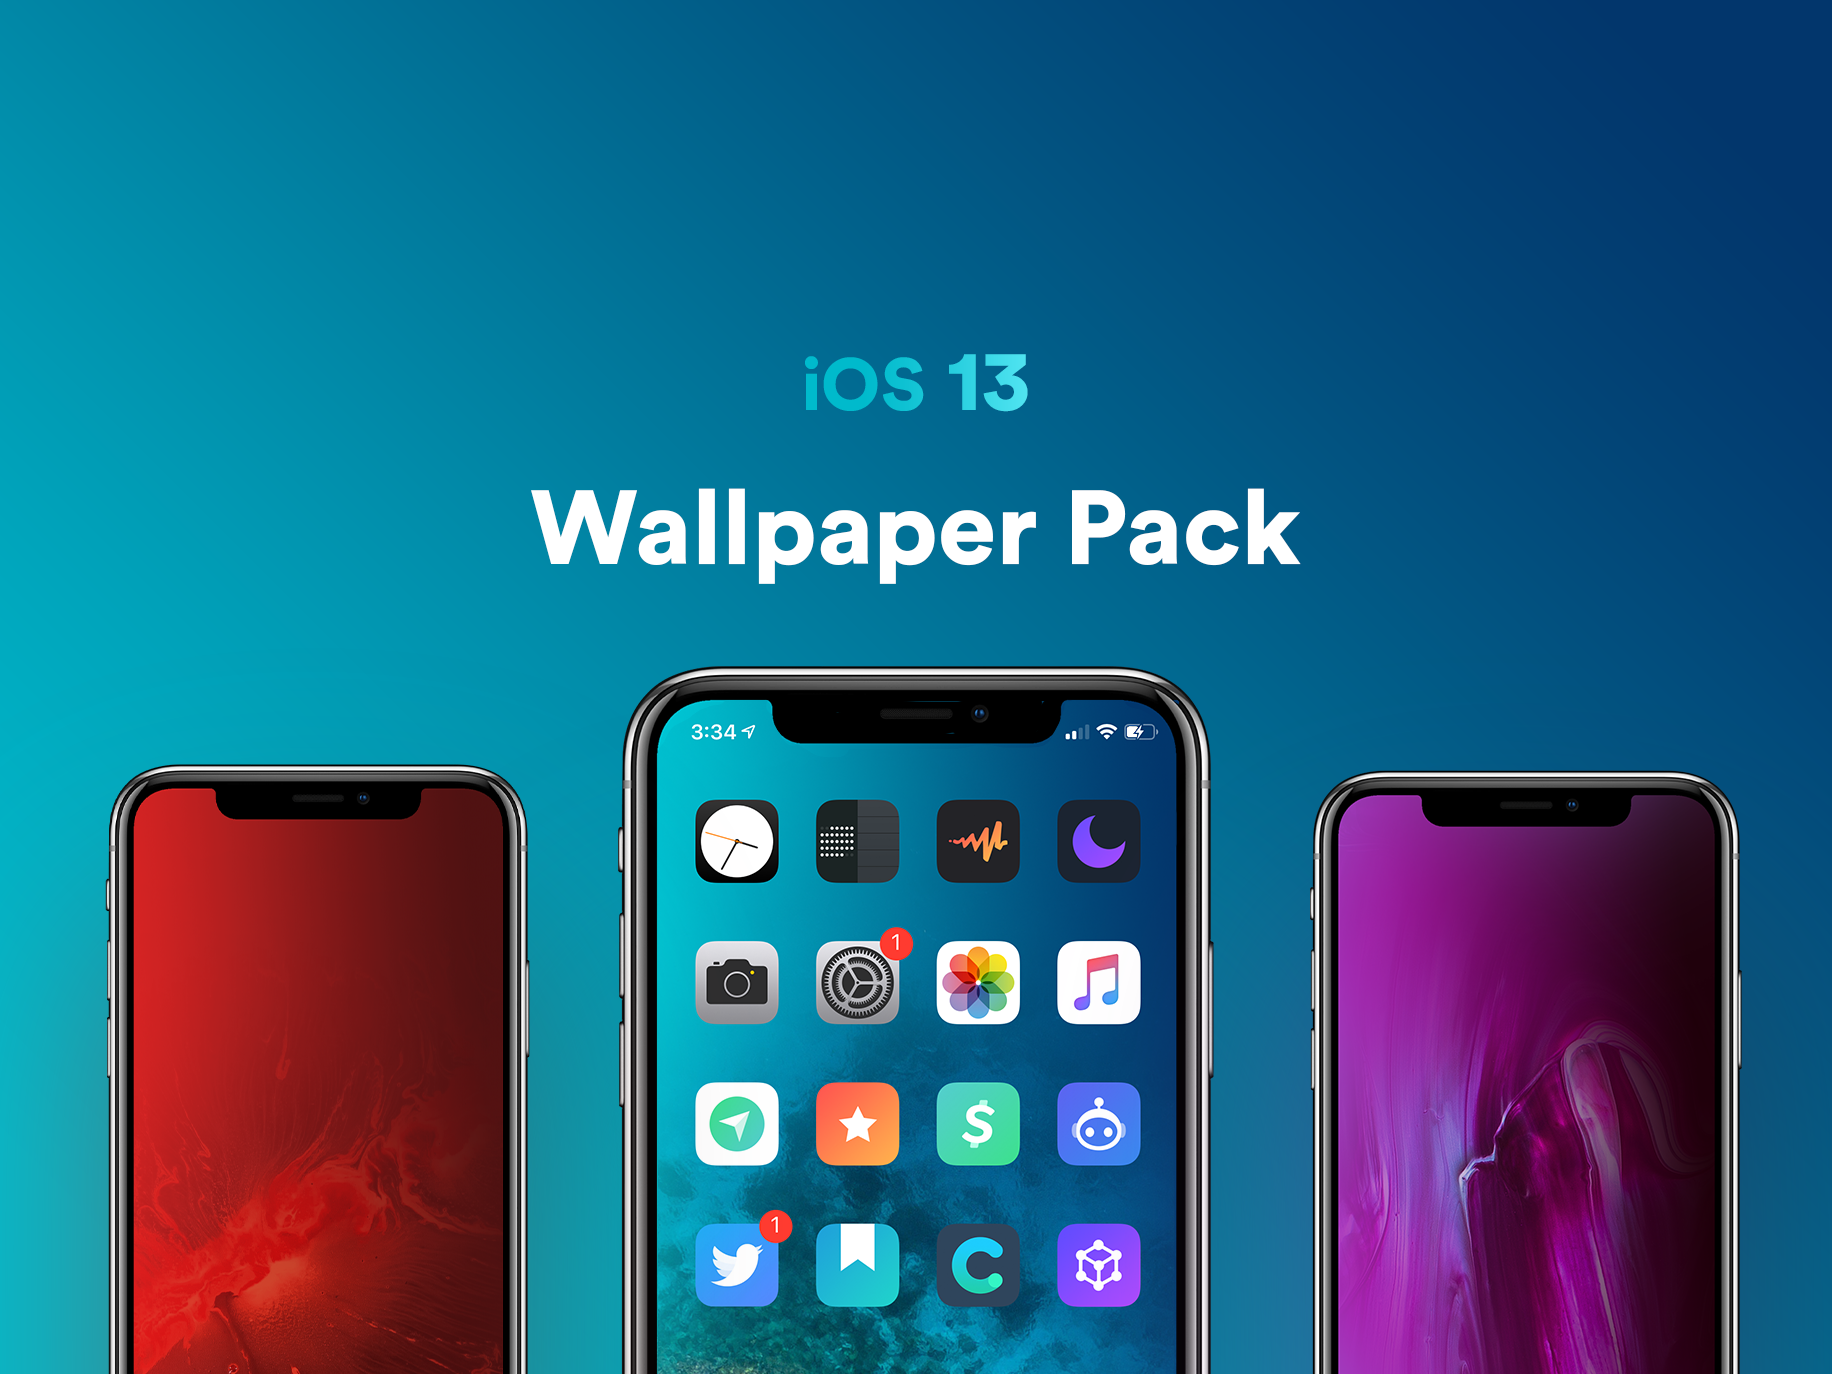 Release] iOS 13 Wallpaper pack iOSthemes